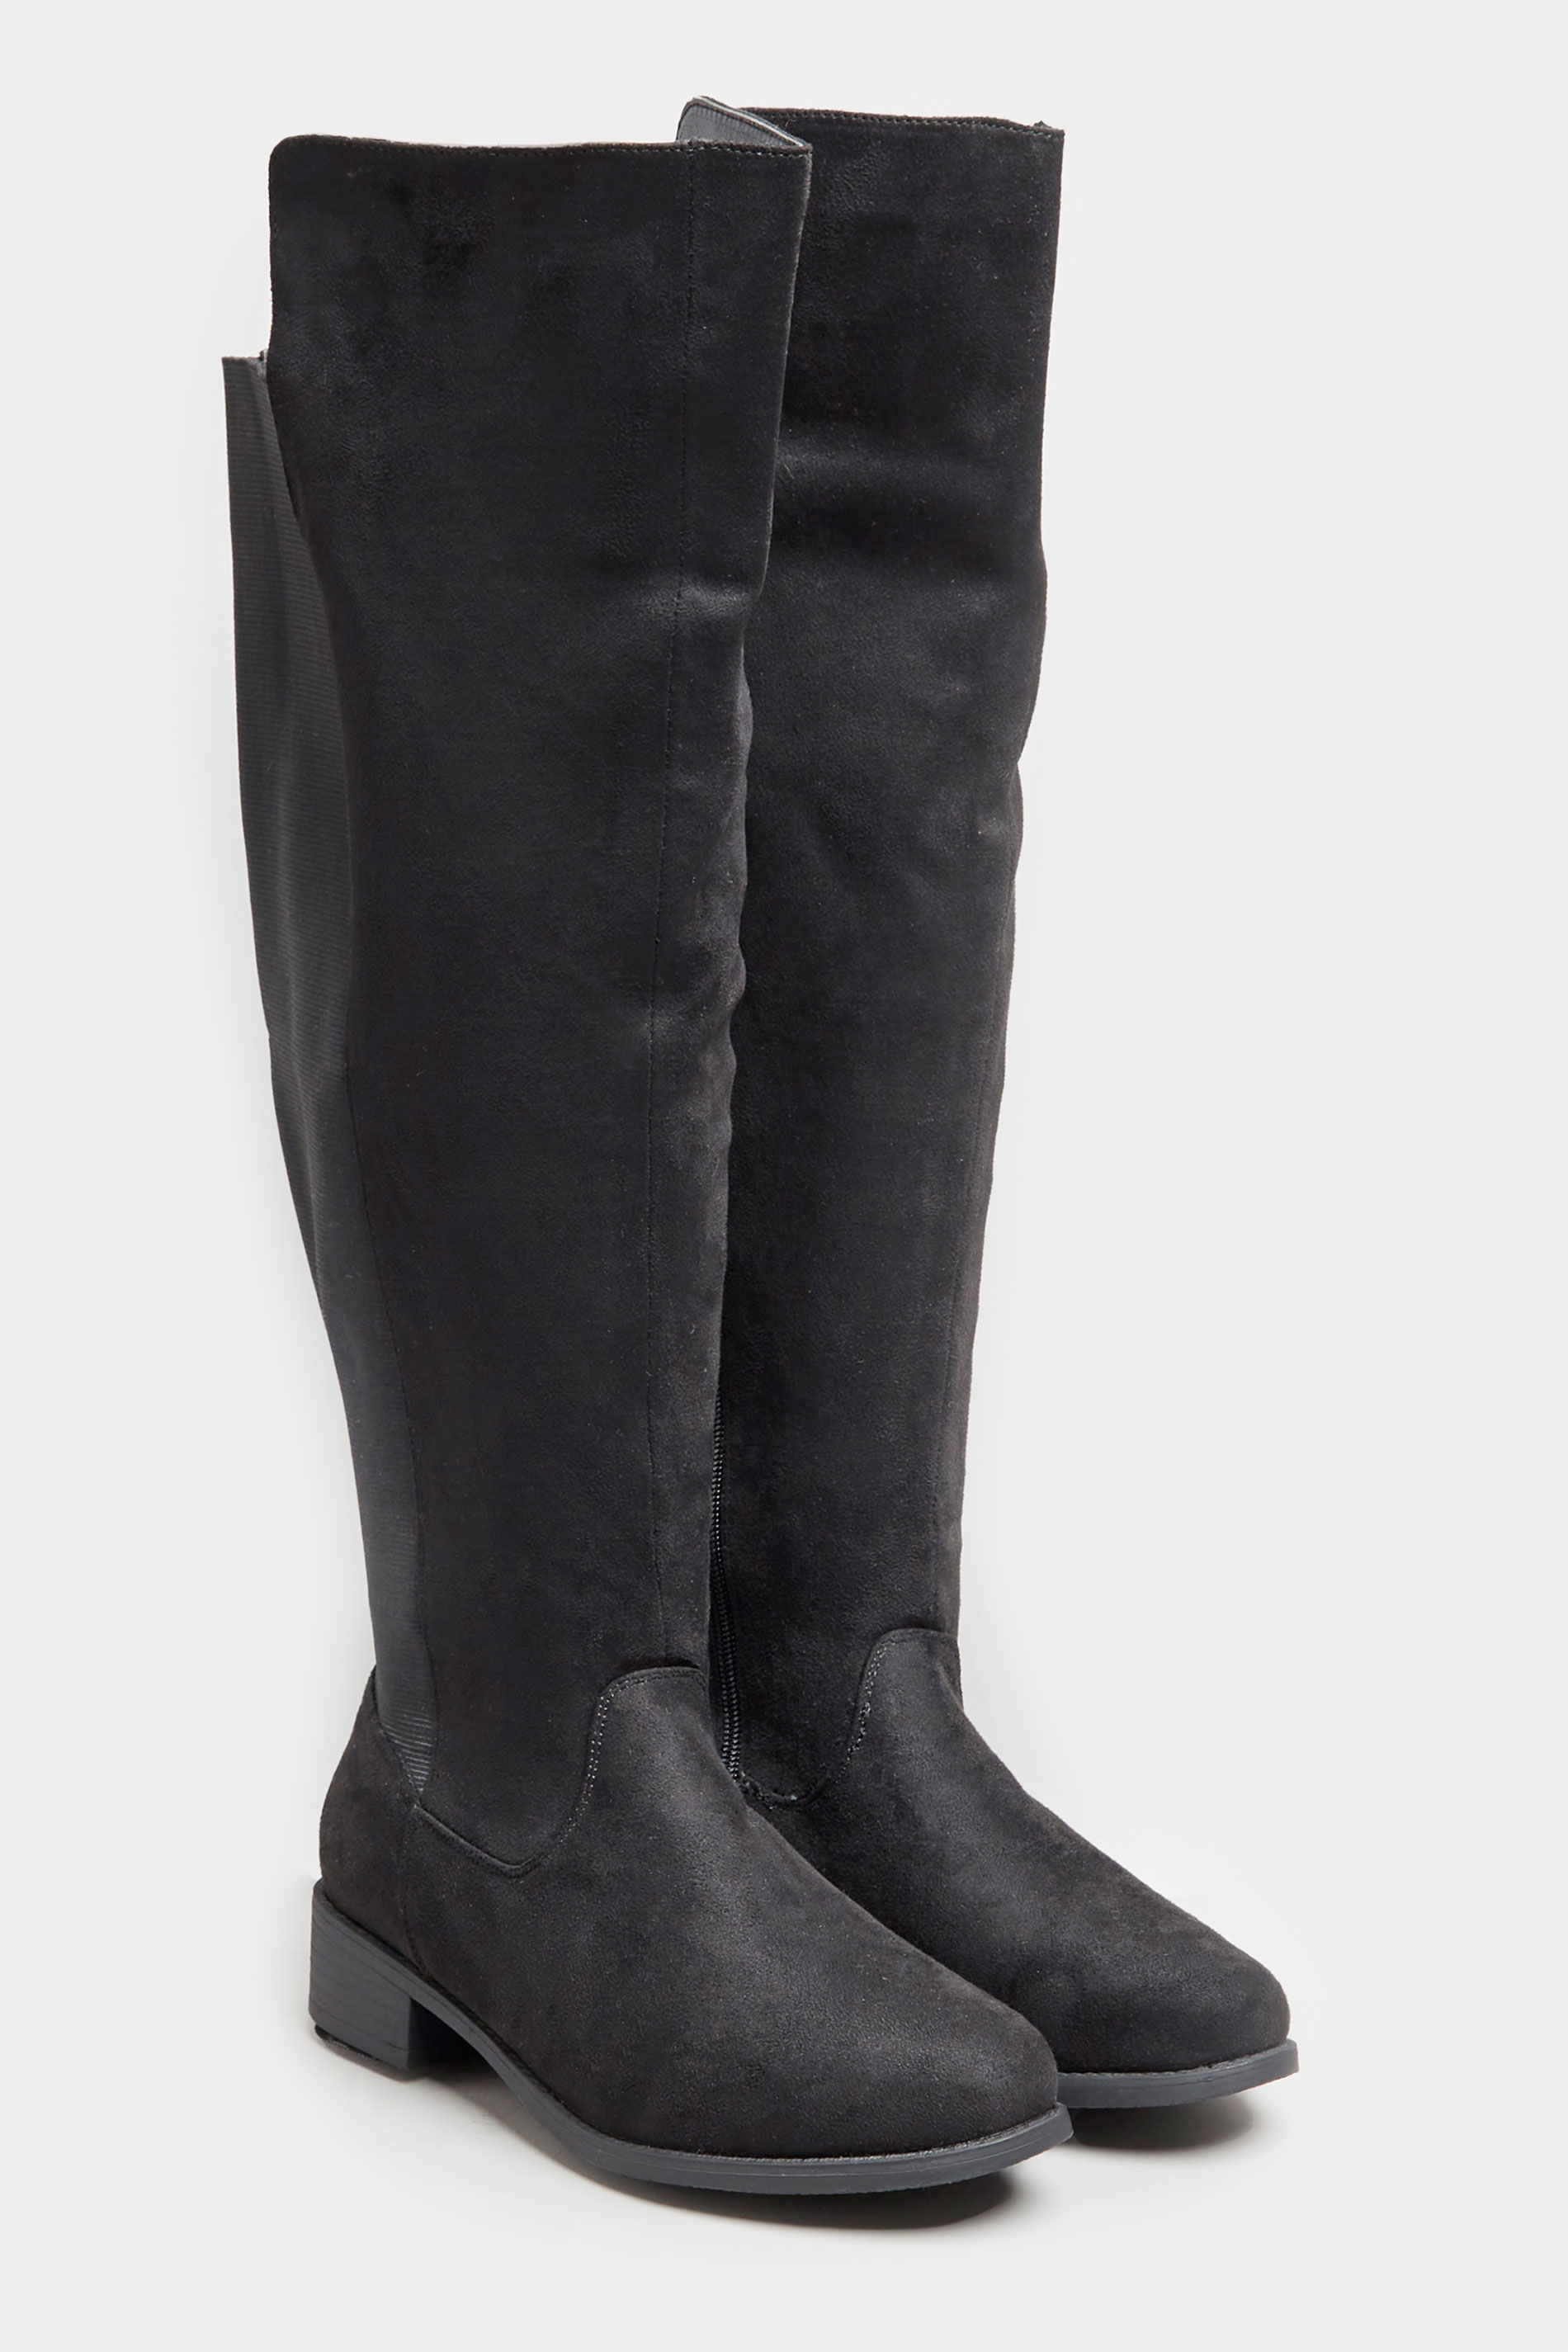 Black Stretch Vegan Suedette Over The Knee Boots In Extra Wide EEE Fit_R.jpg